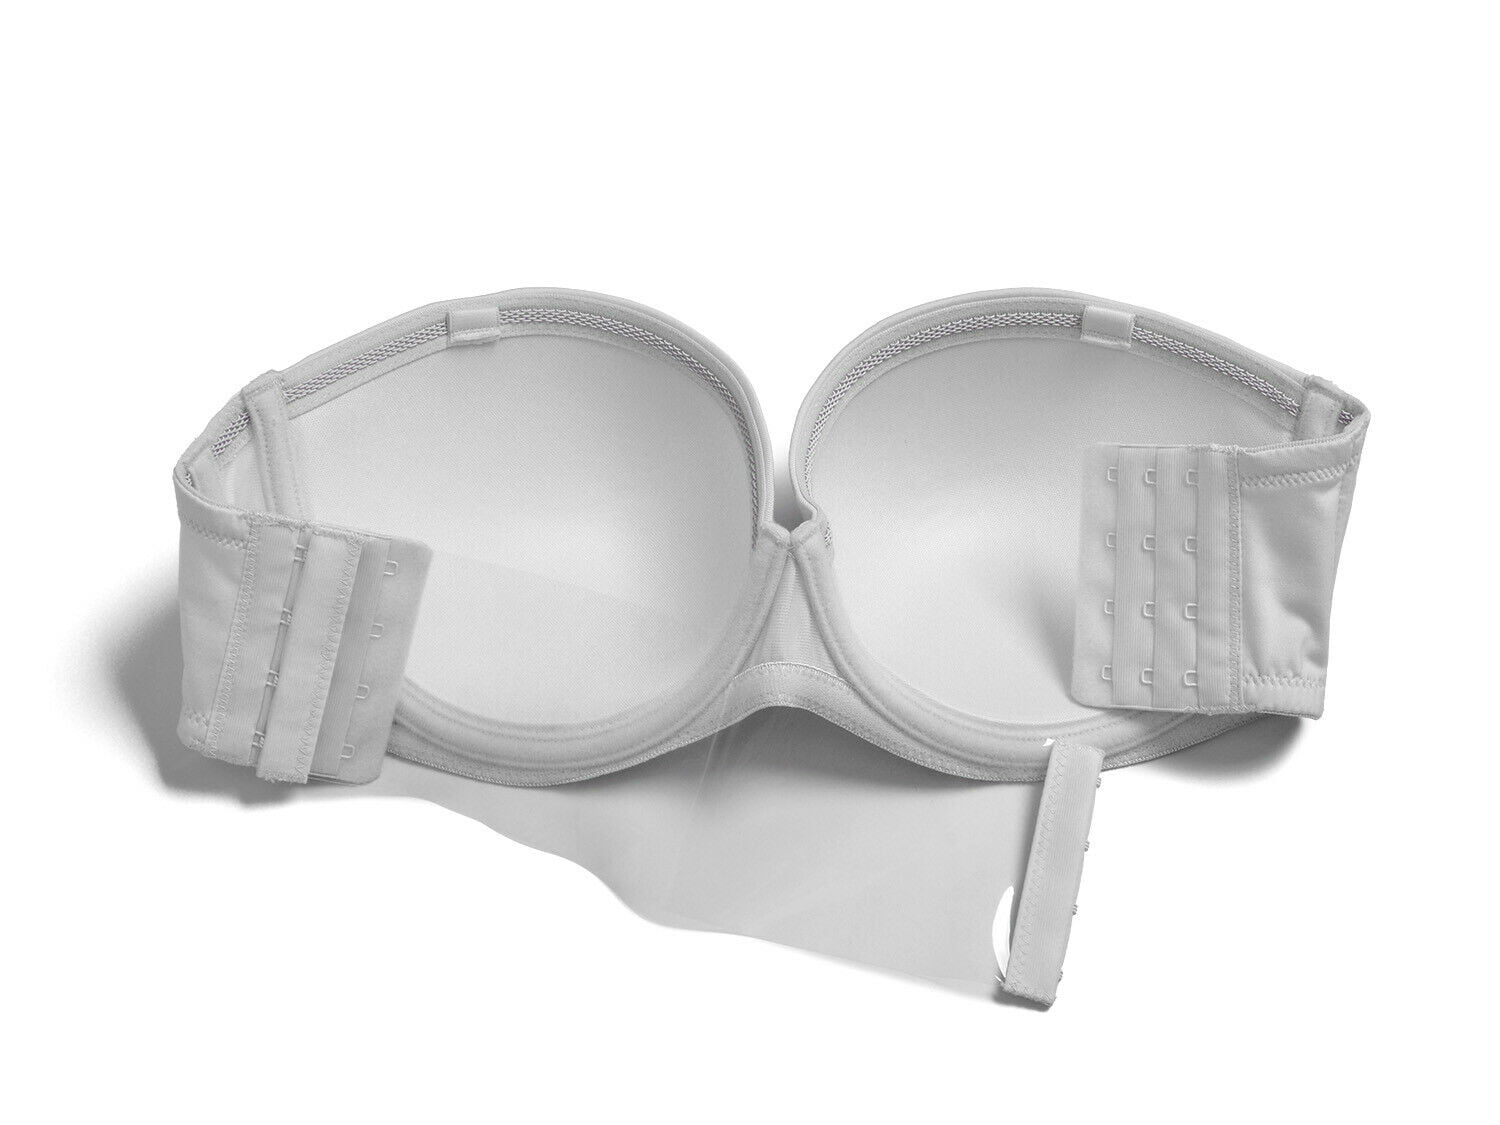 HWDI 42D White Strapless clear Back Bras with Straps Plus Size Multiway  Lift Up